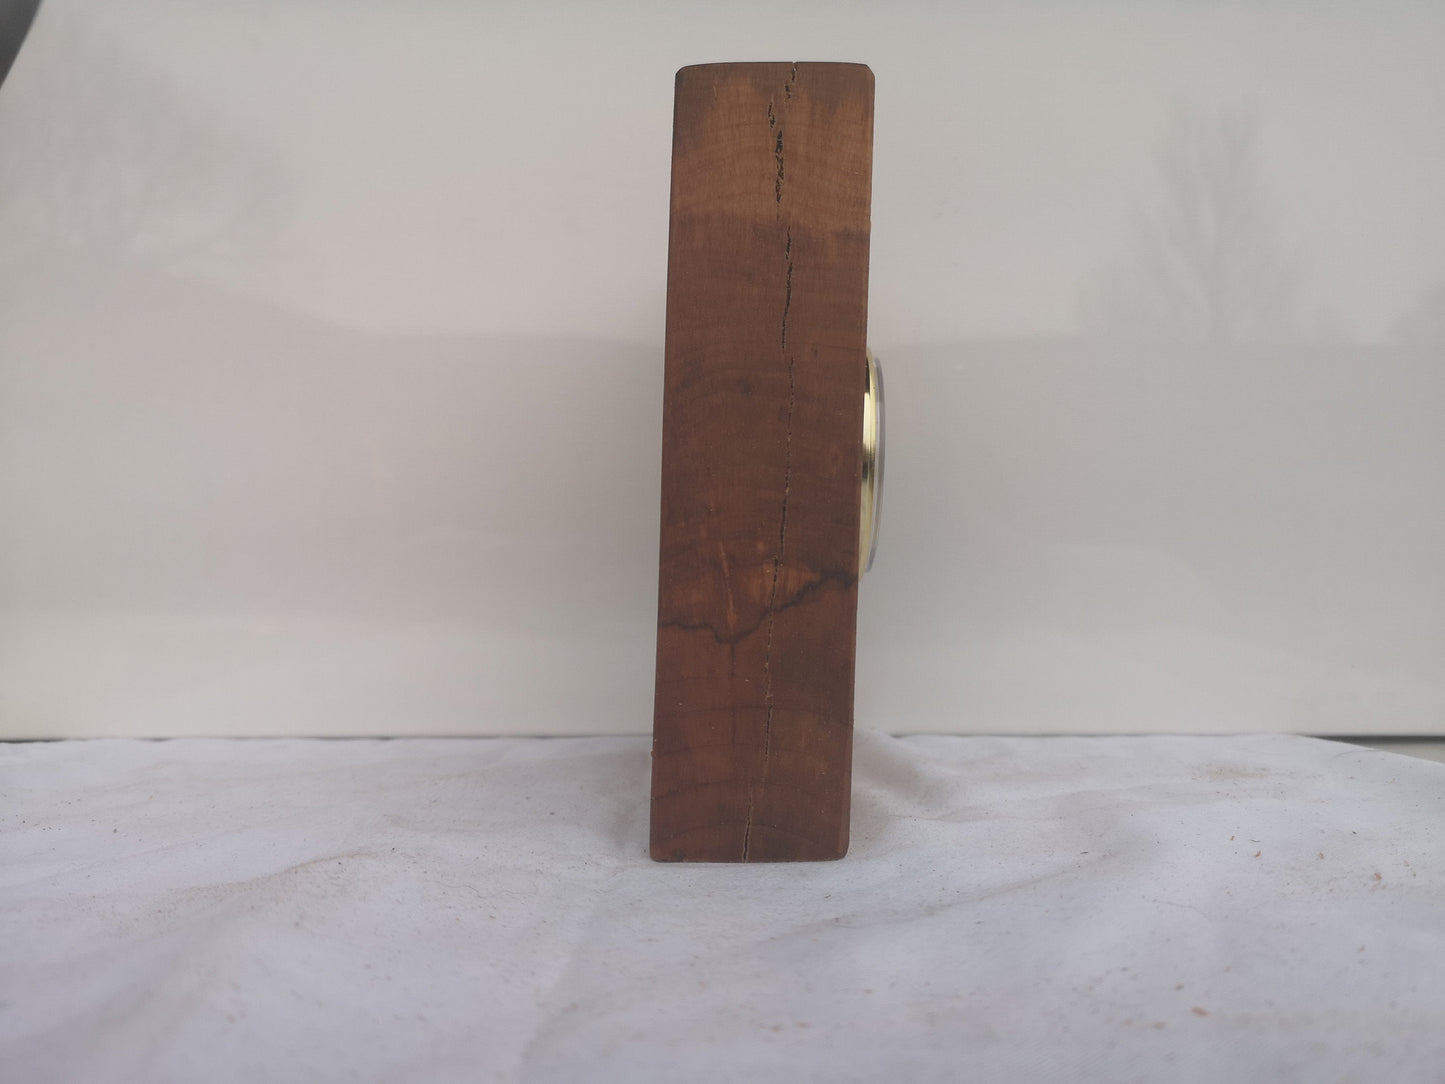 Handmade Applewood clock in unique design one of a kind